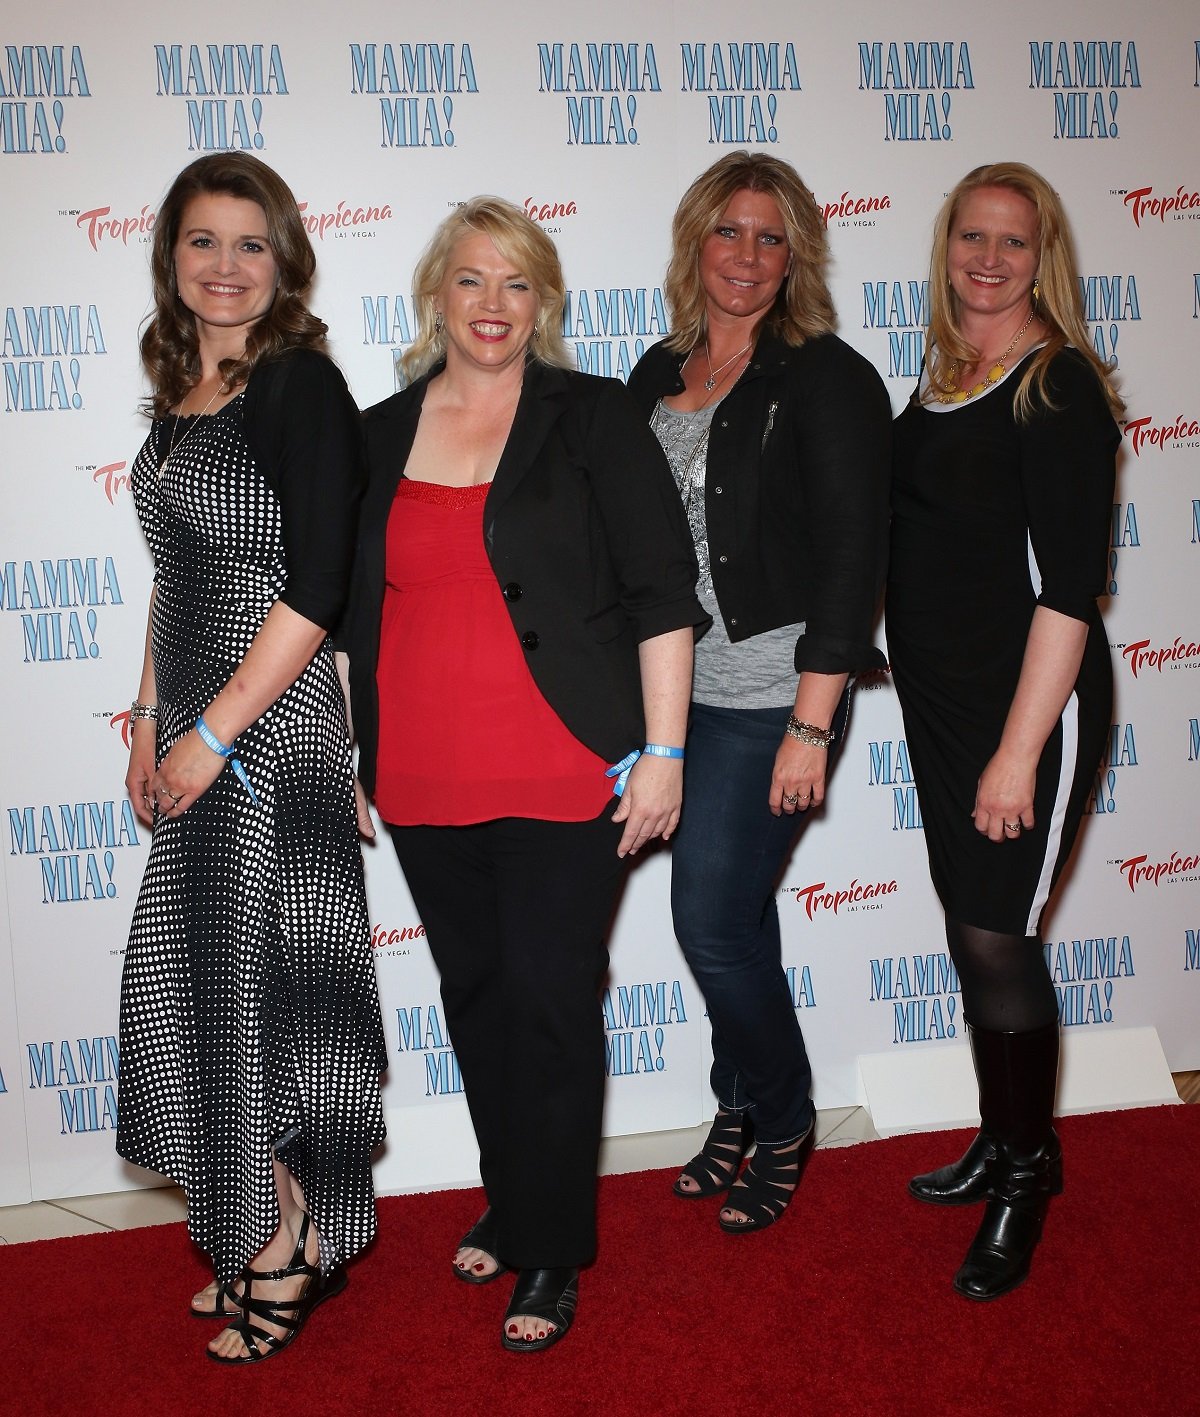 Robyn Brown, Janelle Brown Meri Brown and Christine Brown from "Sister Wives" arrive at the grand opening of the show "Mamma Mia!" at the New Tropicana Las Vegas on May 16, 2014 in Las Vegas, Nevada.